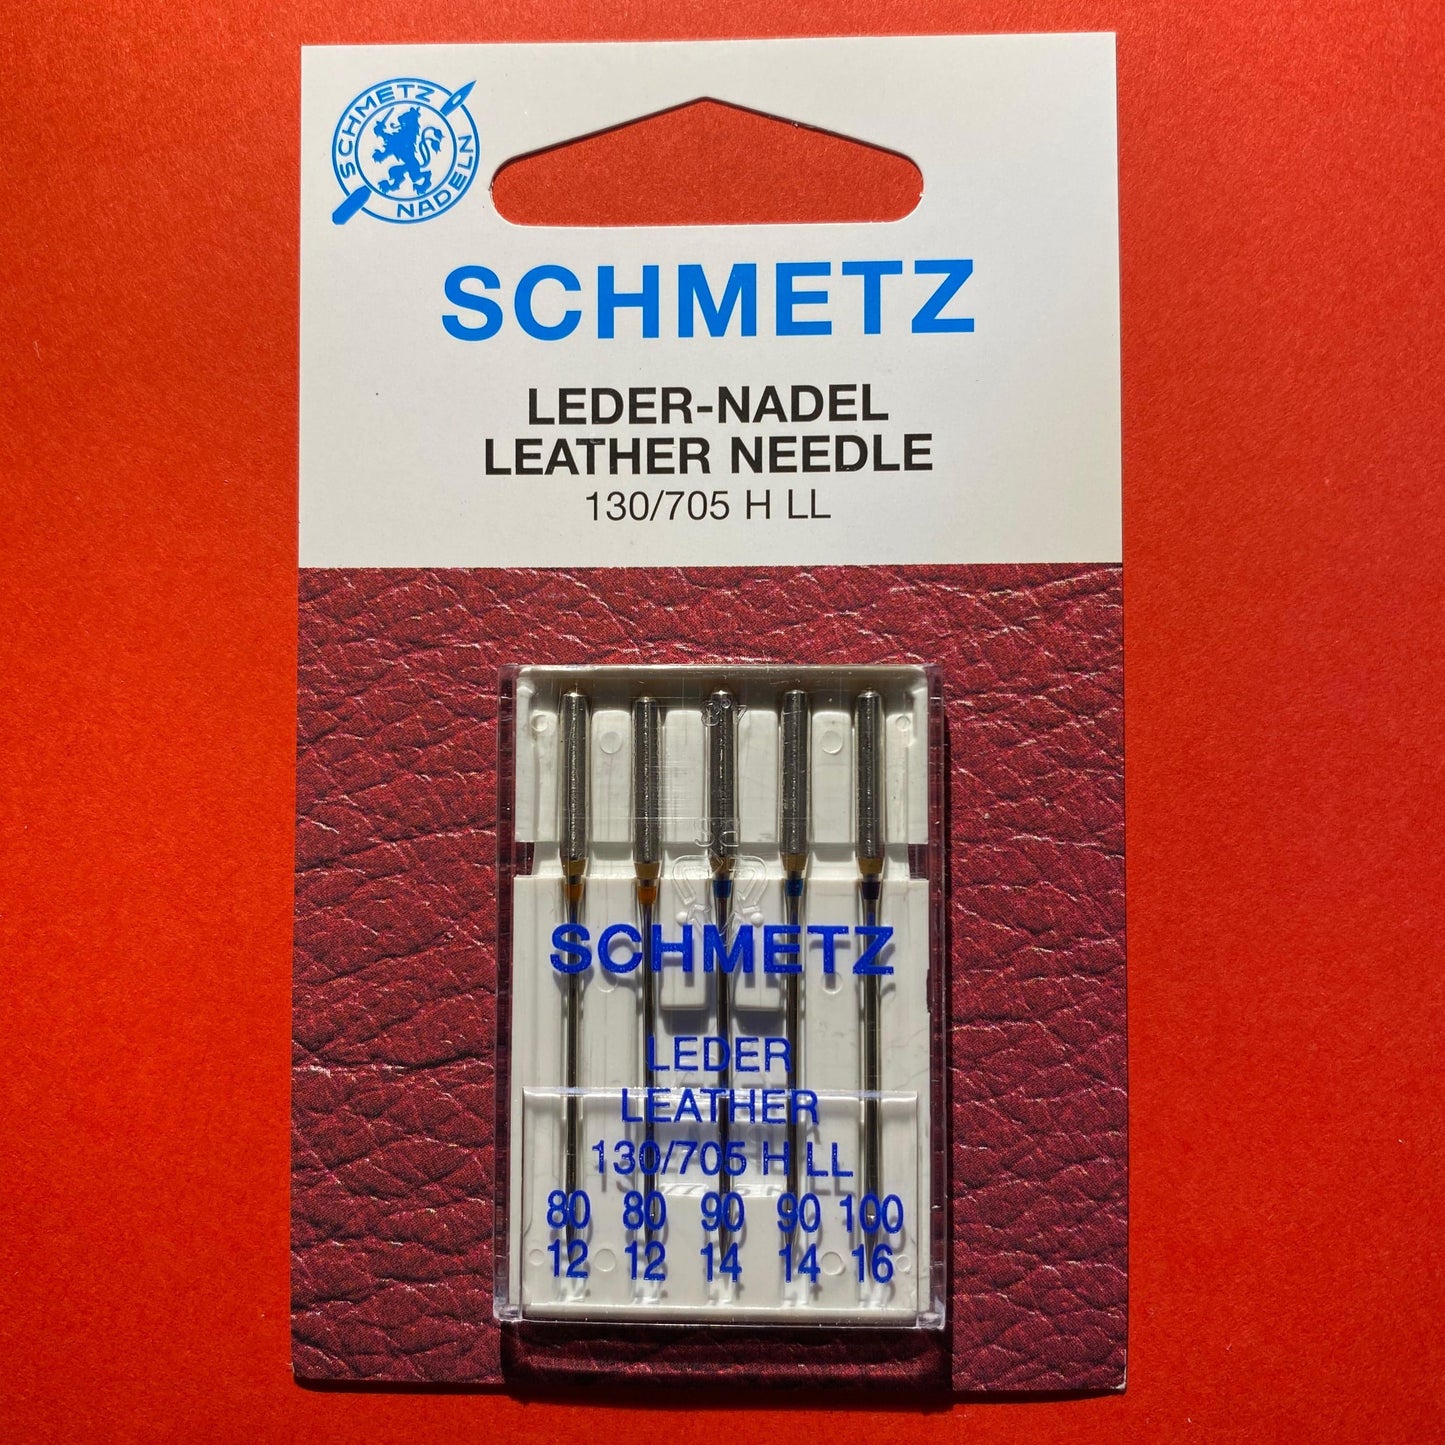 Schmetz Leather Needles 130/705 G LL Assorted 80 to 100 - 5 pack